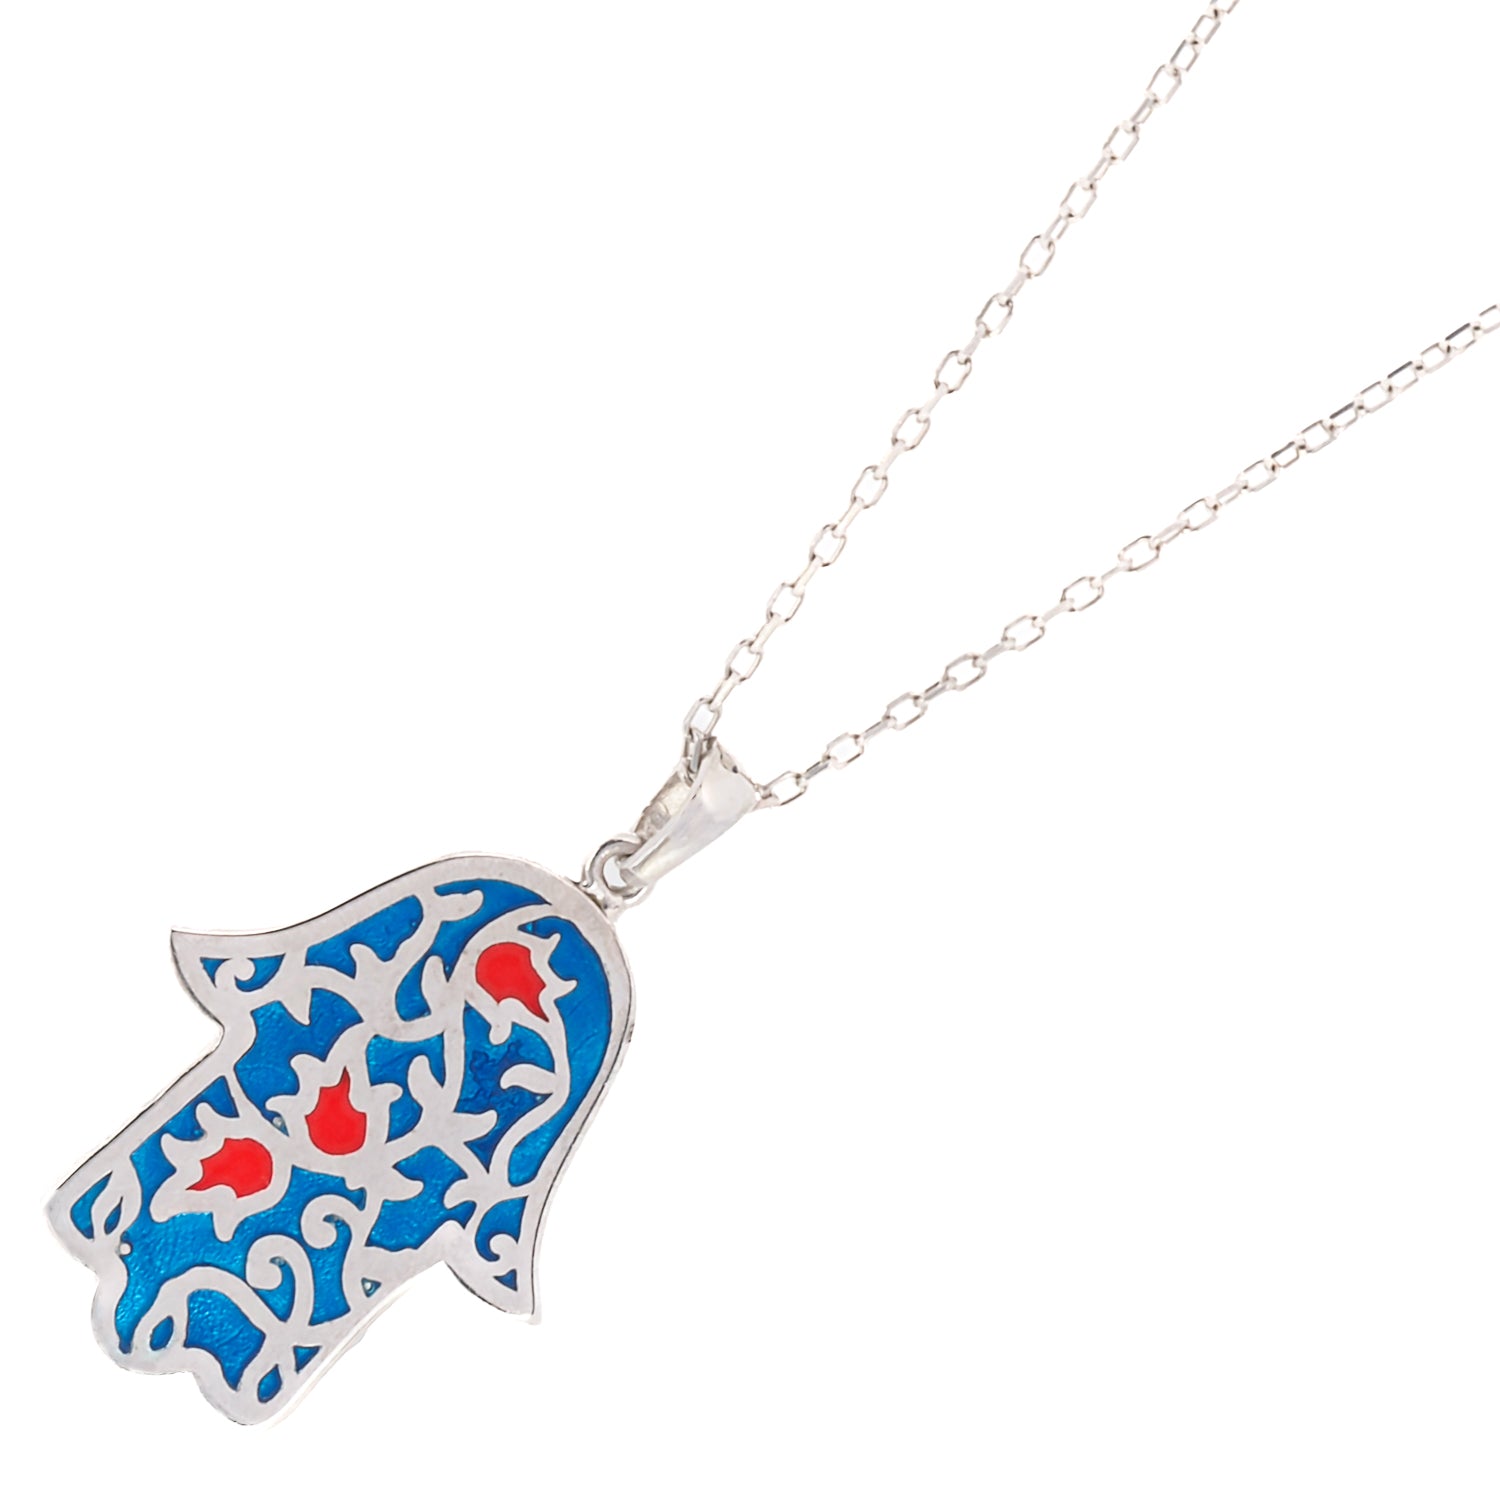 The sterling silver chain of the Good Vibes Enamel Hamsa Necklace Silver, beautifully crafted for elegance and durability.